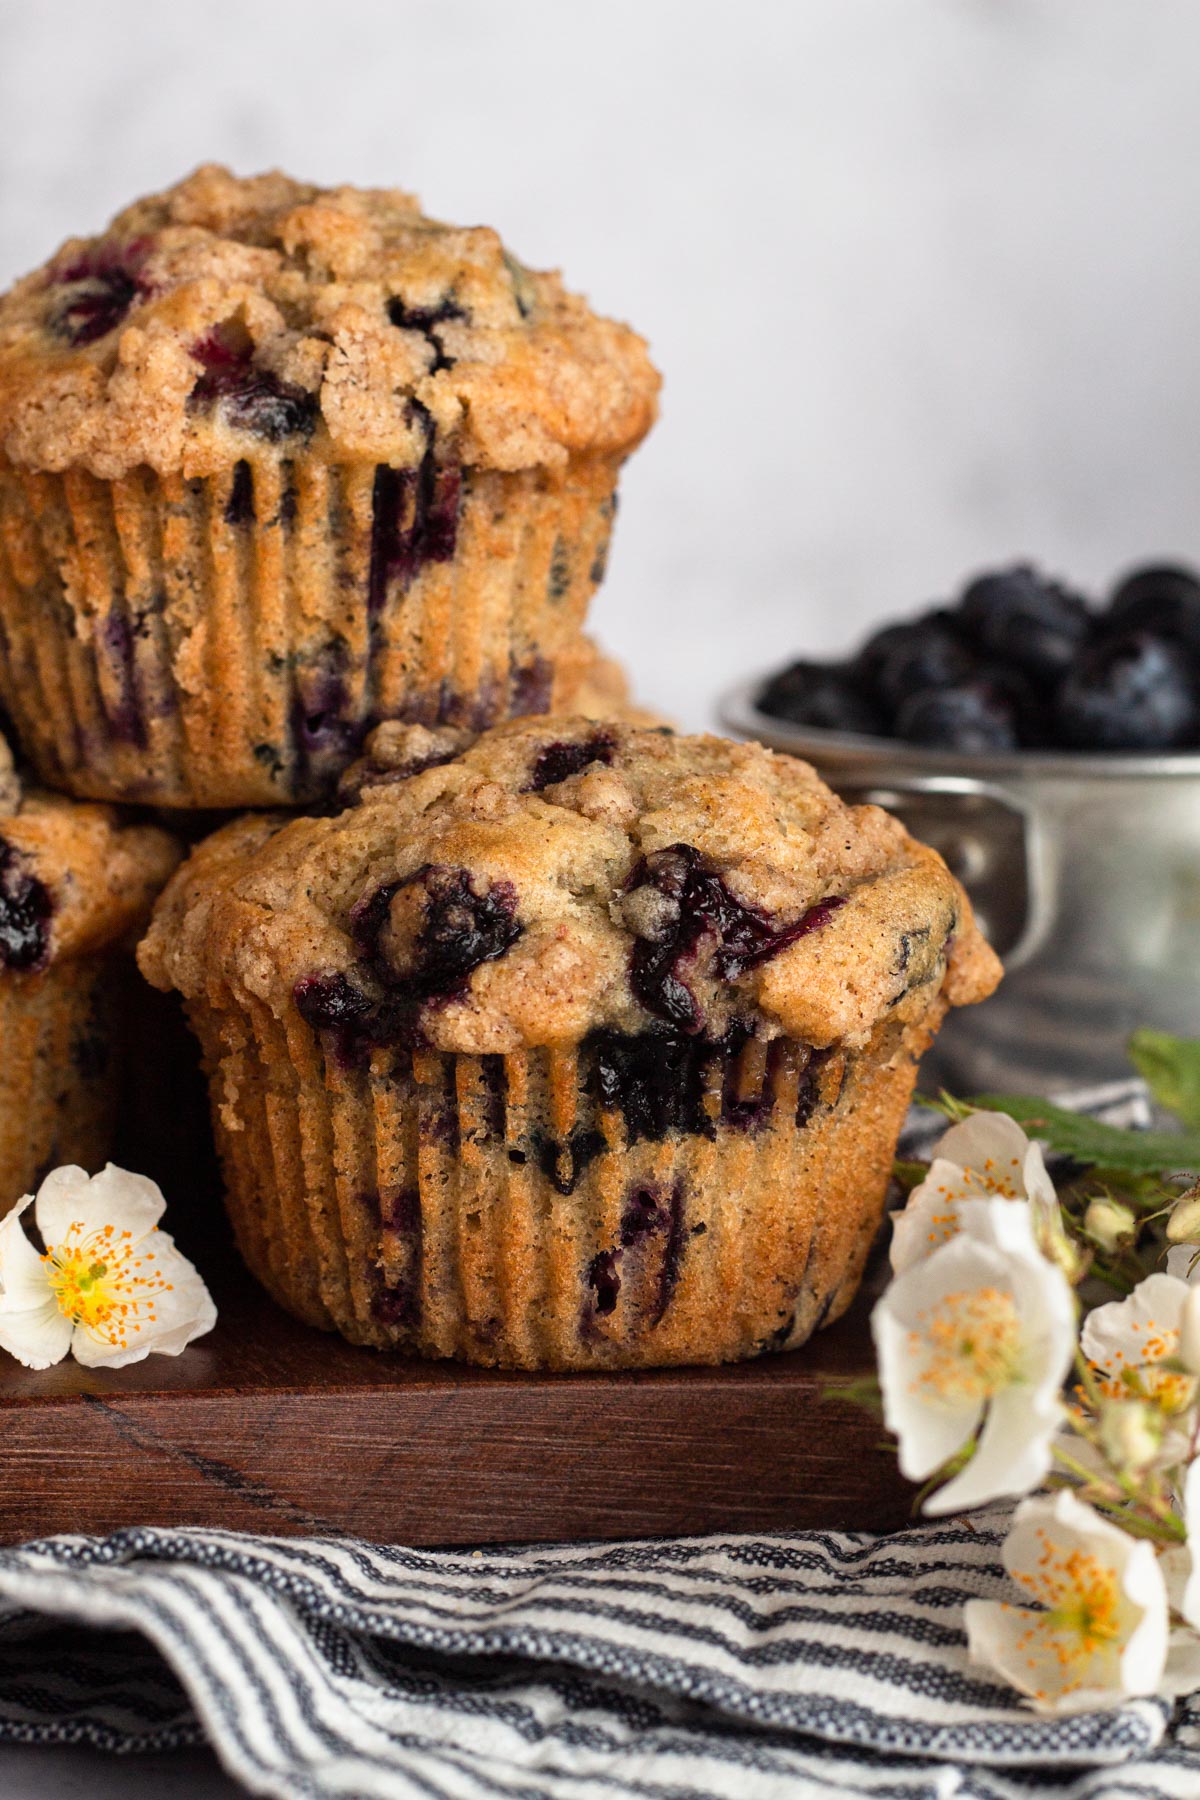 Blueberry muffins stacked on a wooden cutting board with white flowers and a cup of fresh blueberries.